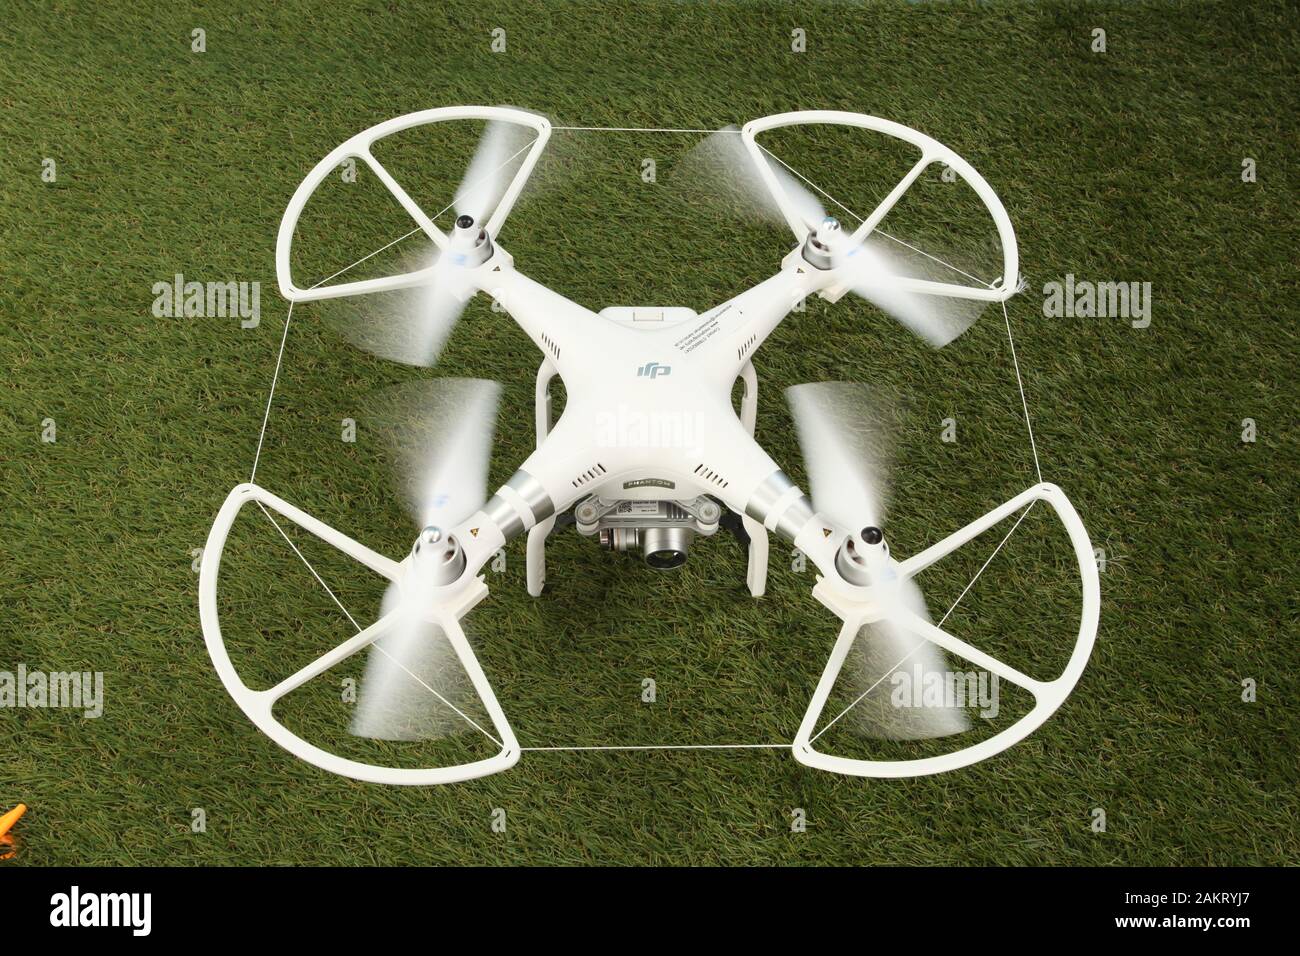 drone, Unmanned aerial vehicle Stock Photo